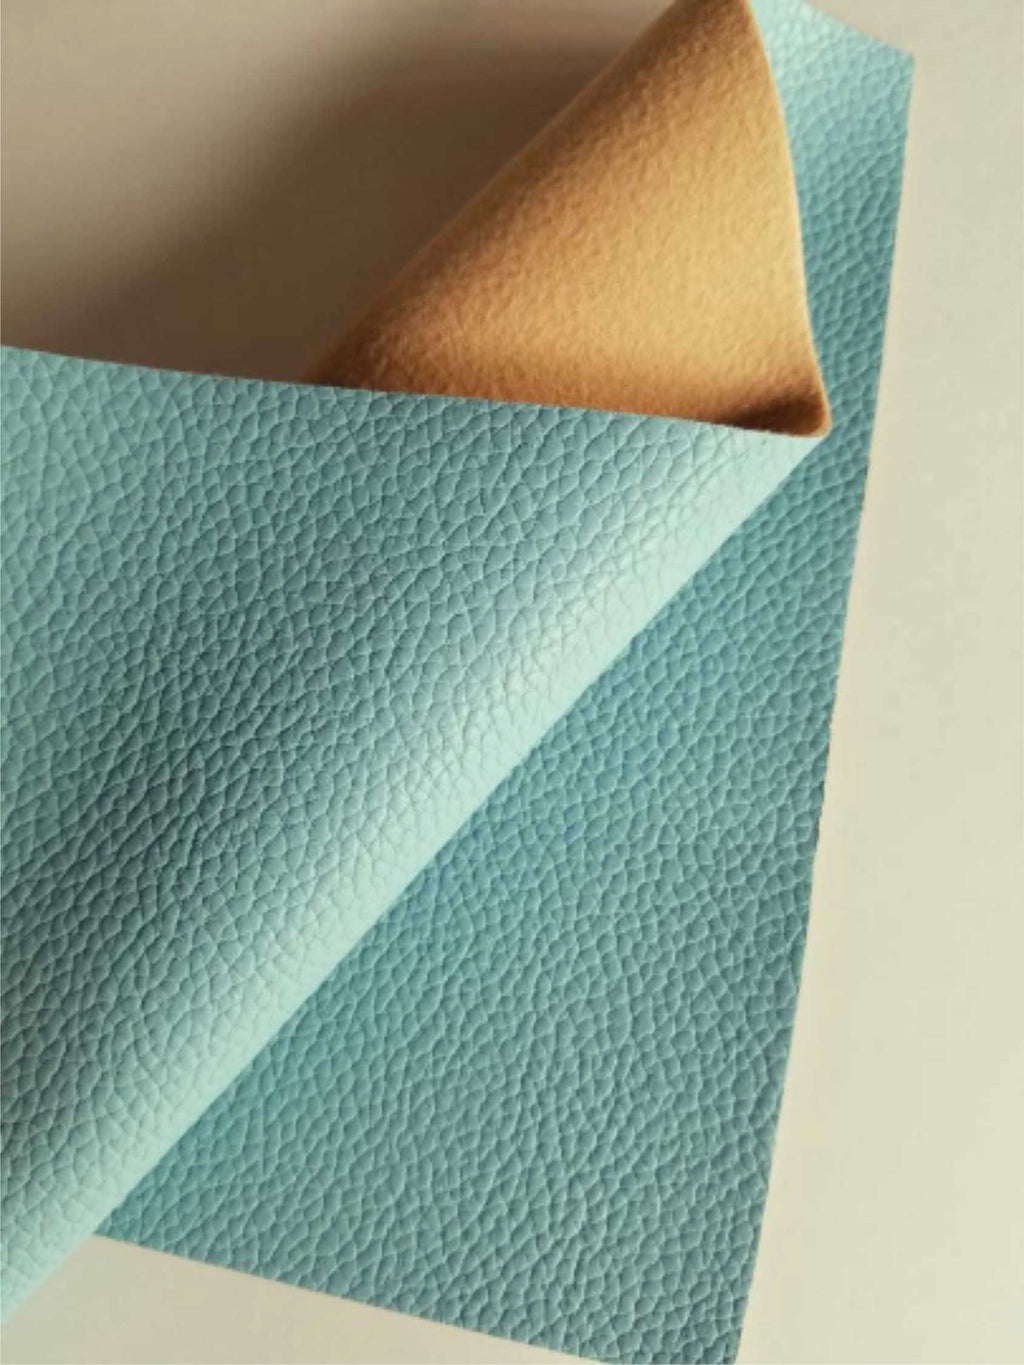 Cadet blue textured faux leather sheets, solid litchi pebbled leather fabric, for bows, earrings and more A4 8x11 inch sheet 16185 - Breeze Crafts